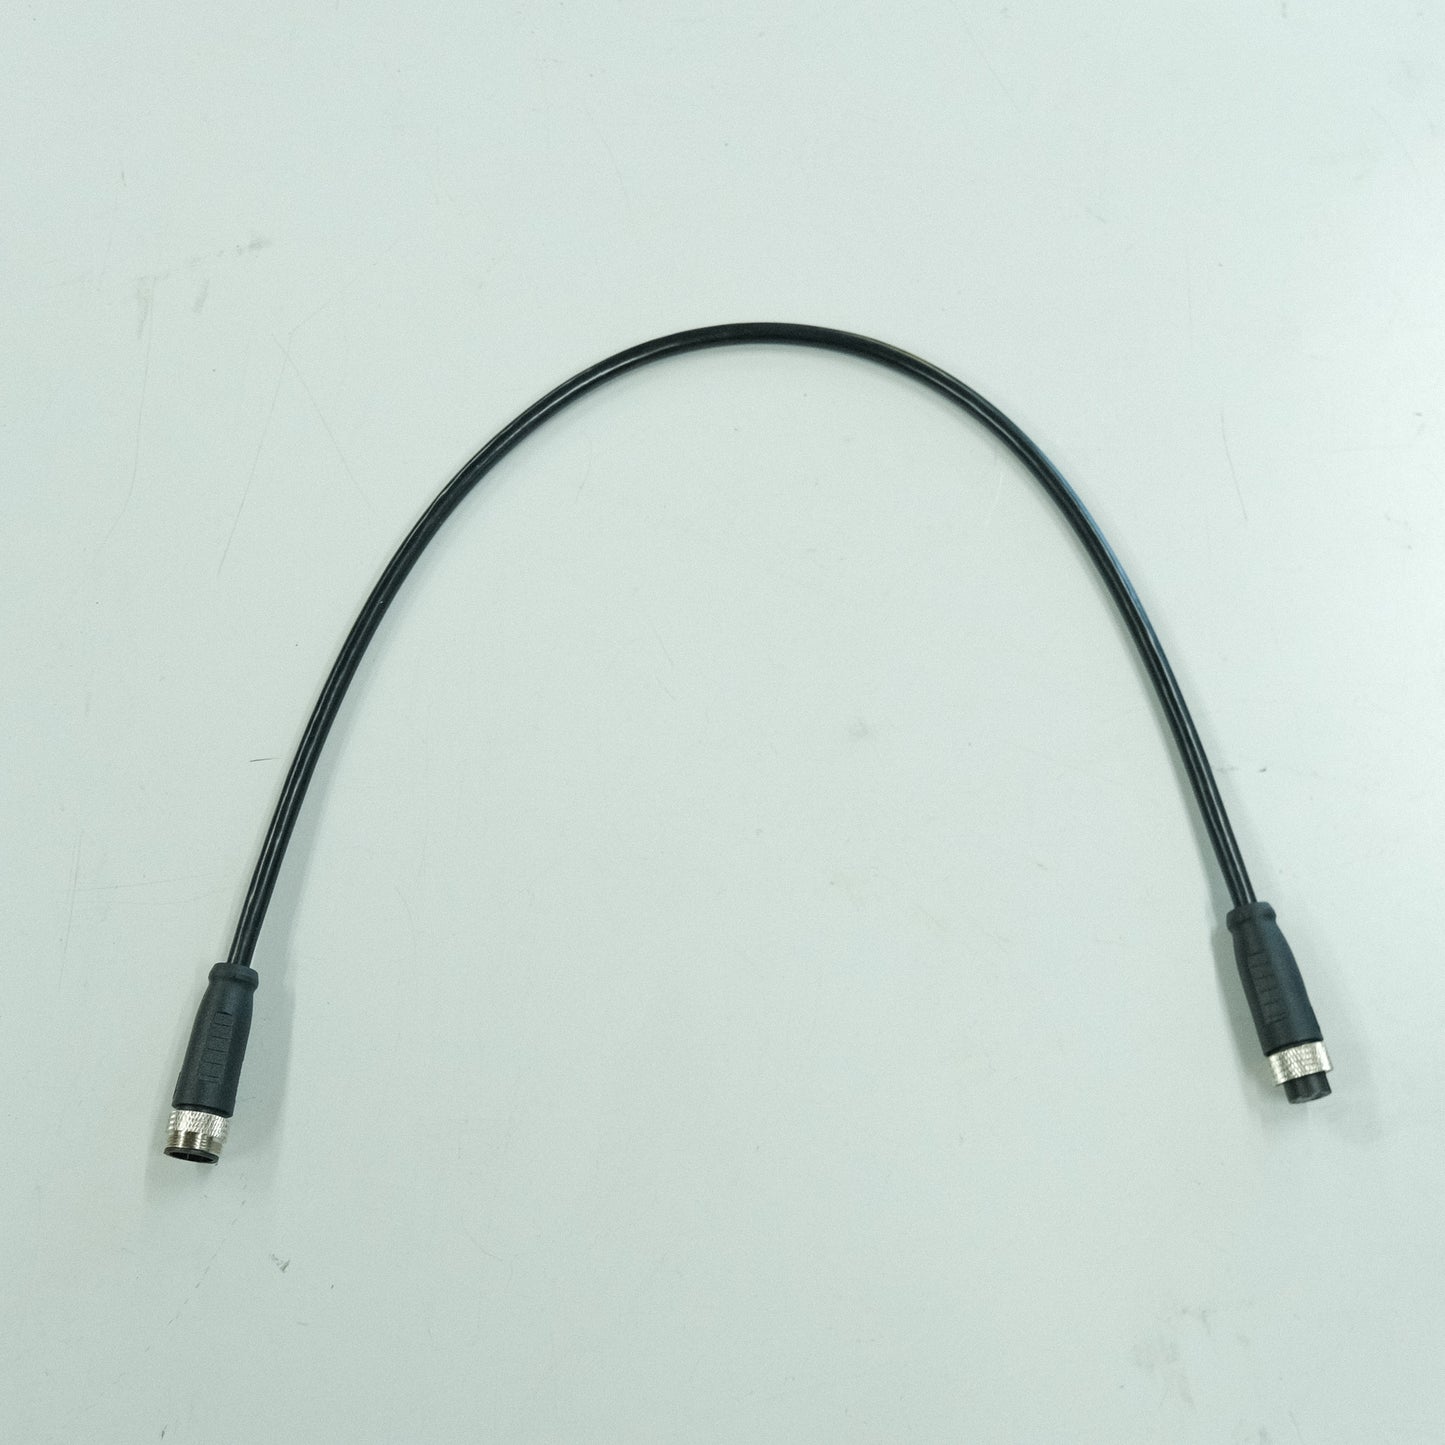 Motor Extension Cable - L1019 - Julet